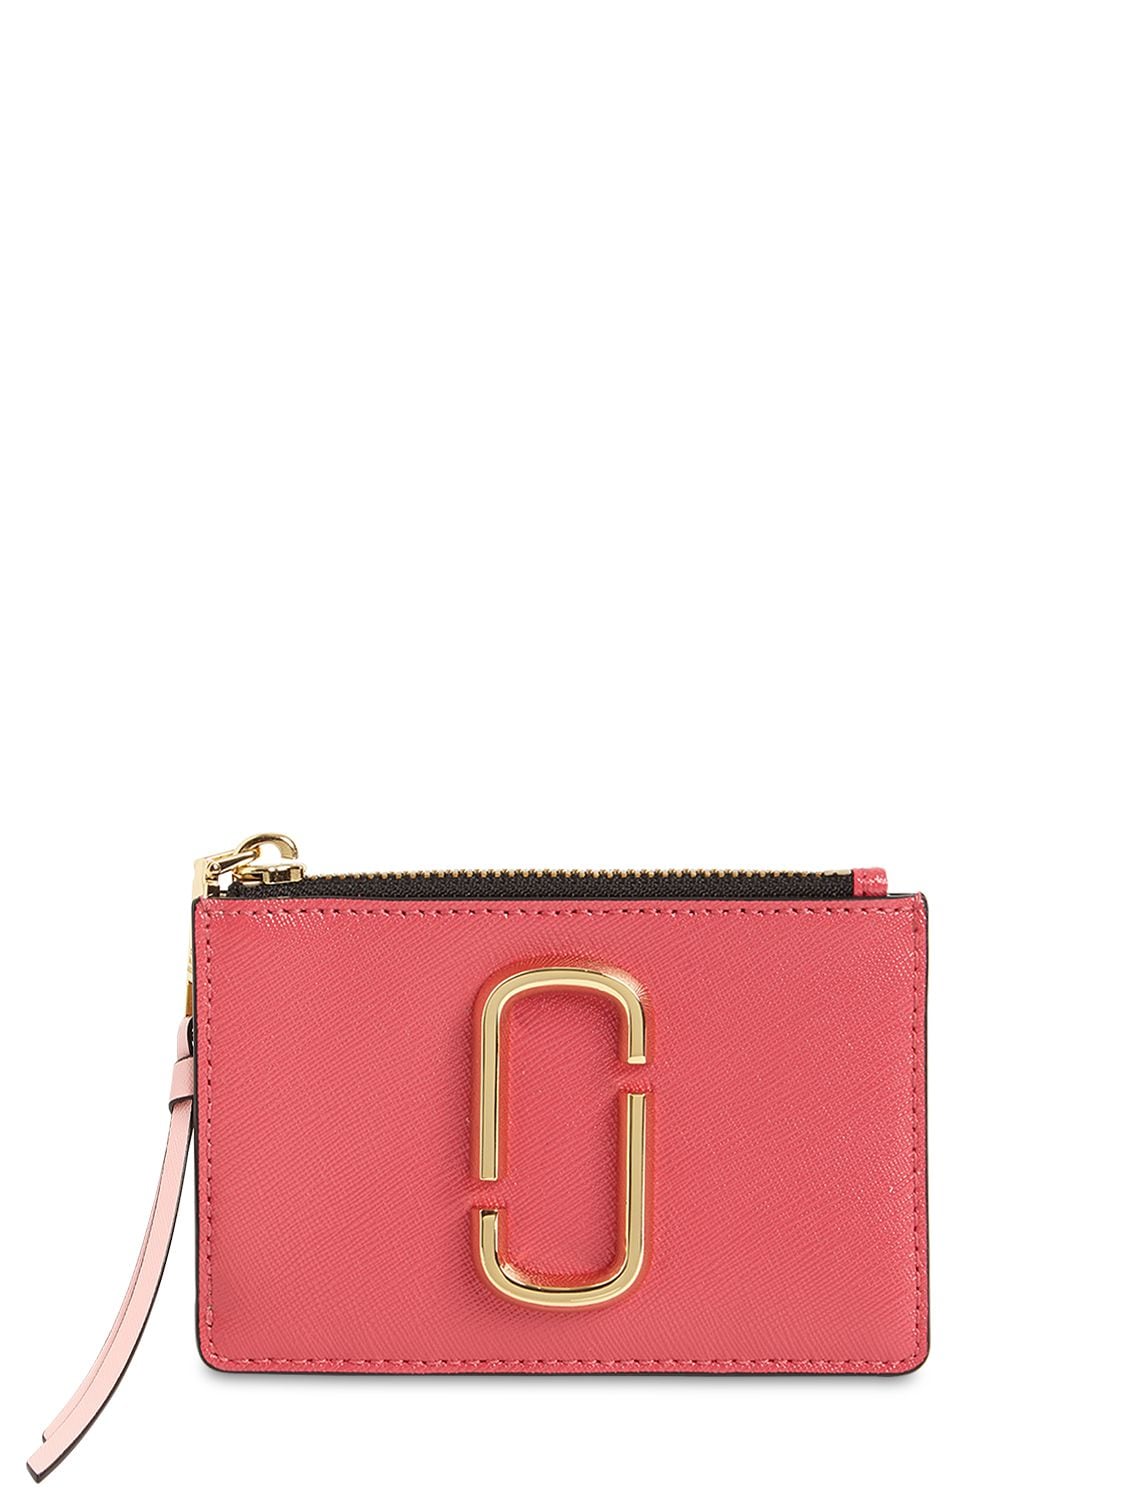 Marc Jacobs Snapshot Leather Zip Card Holder In Dragon Fruit